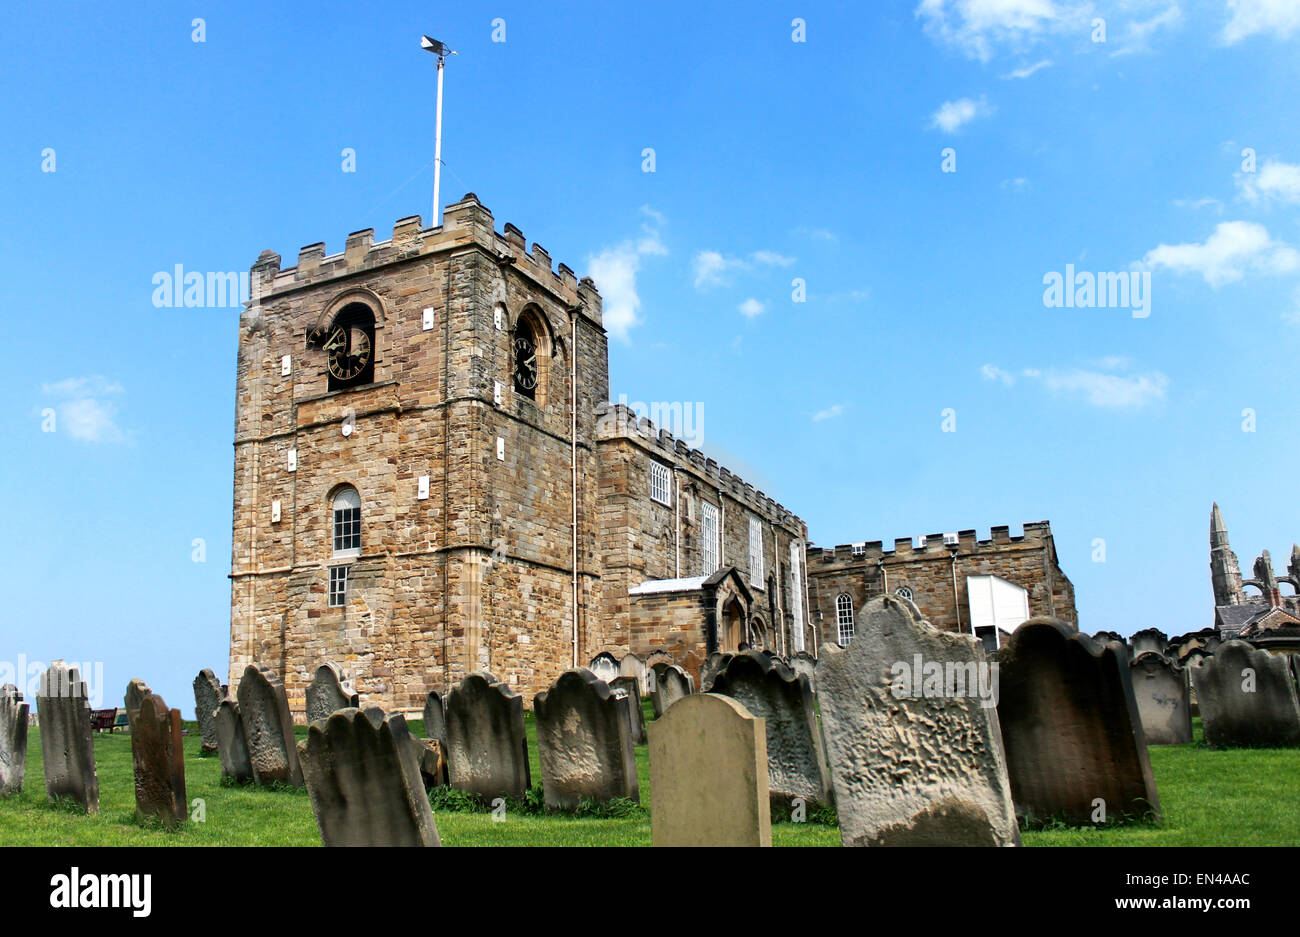 Saint Marys church in Whitby, North Yorkshire, England. Stock Photo